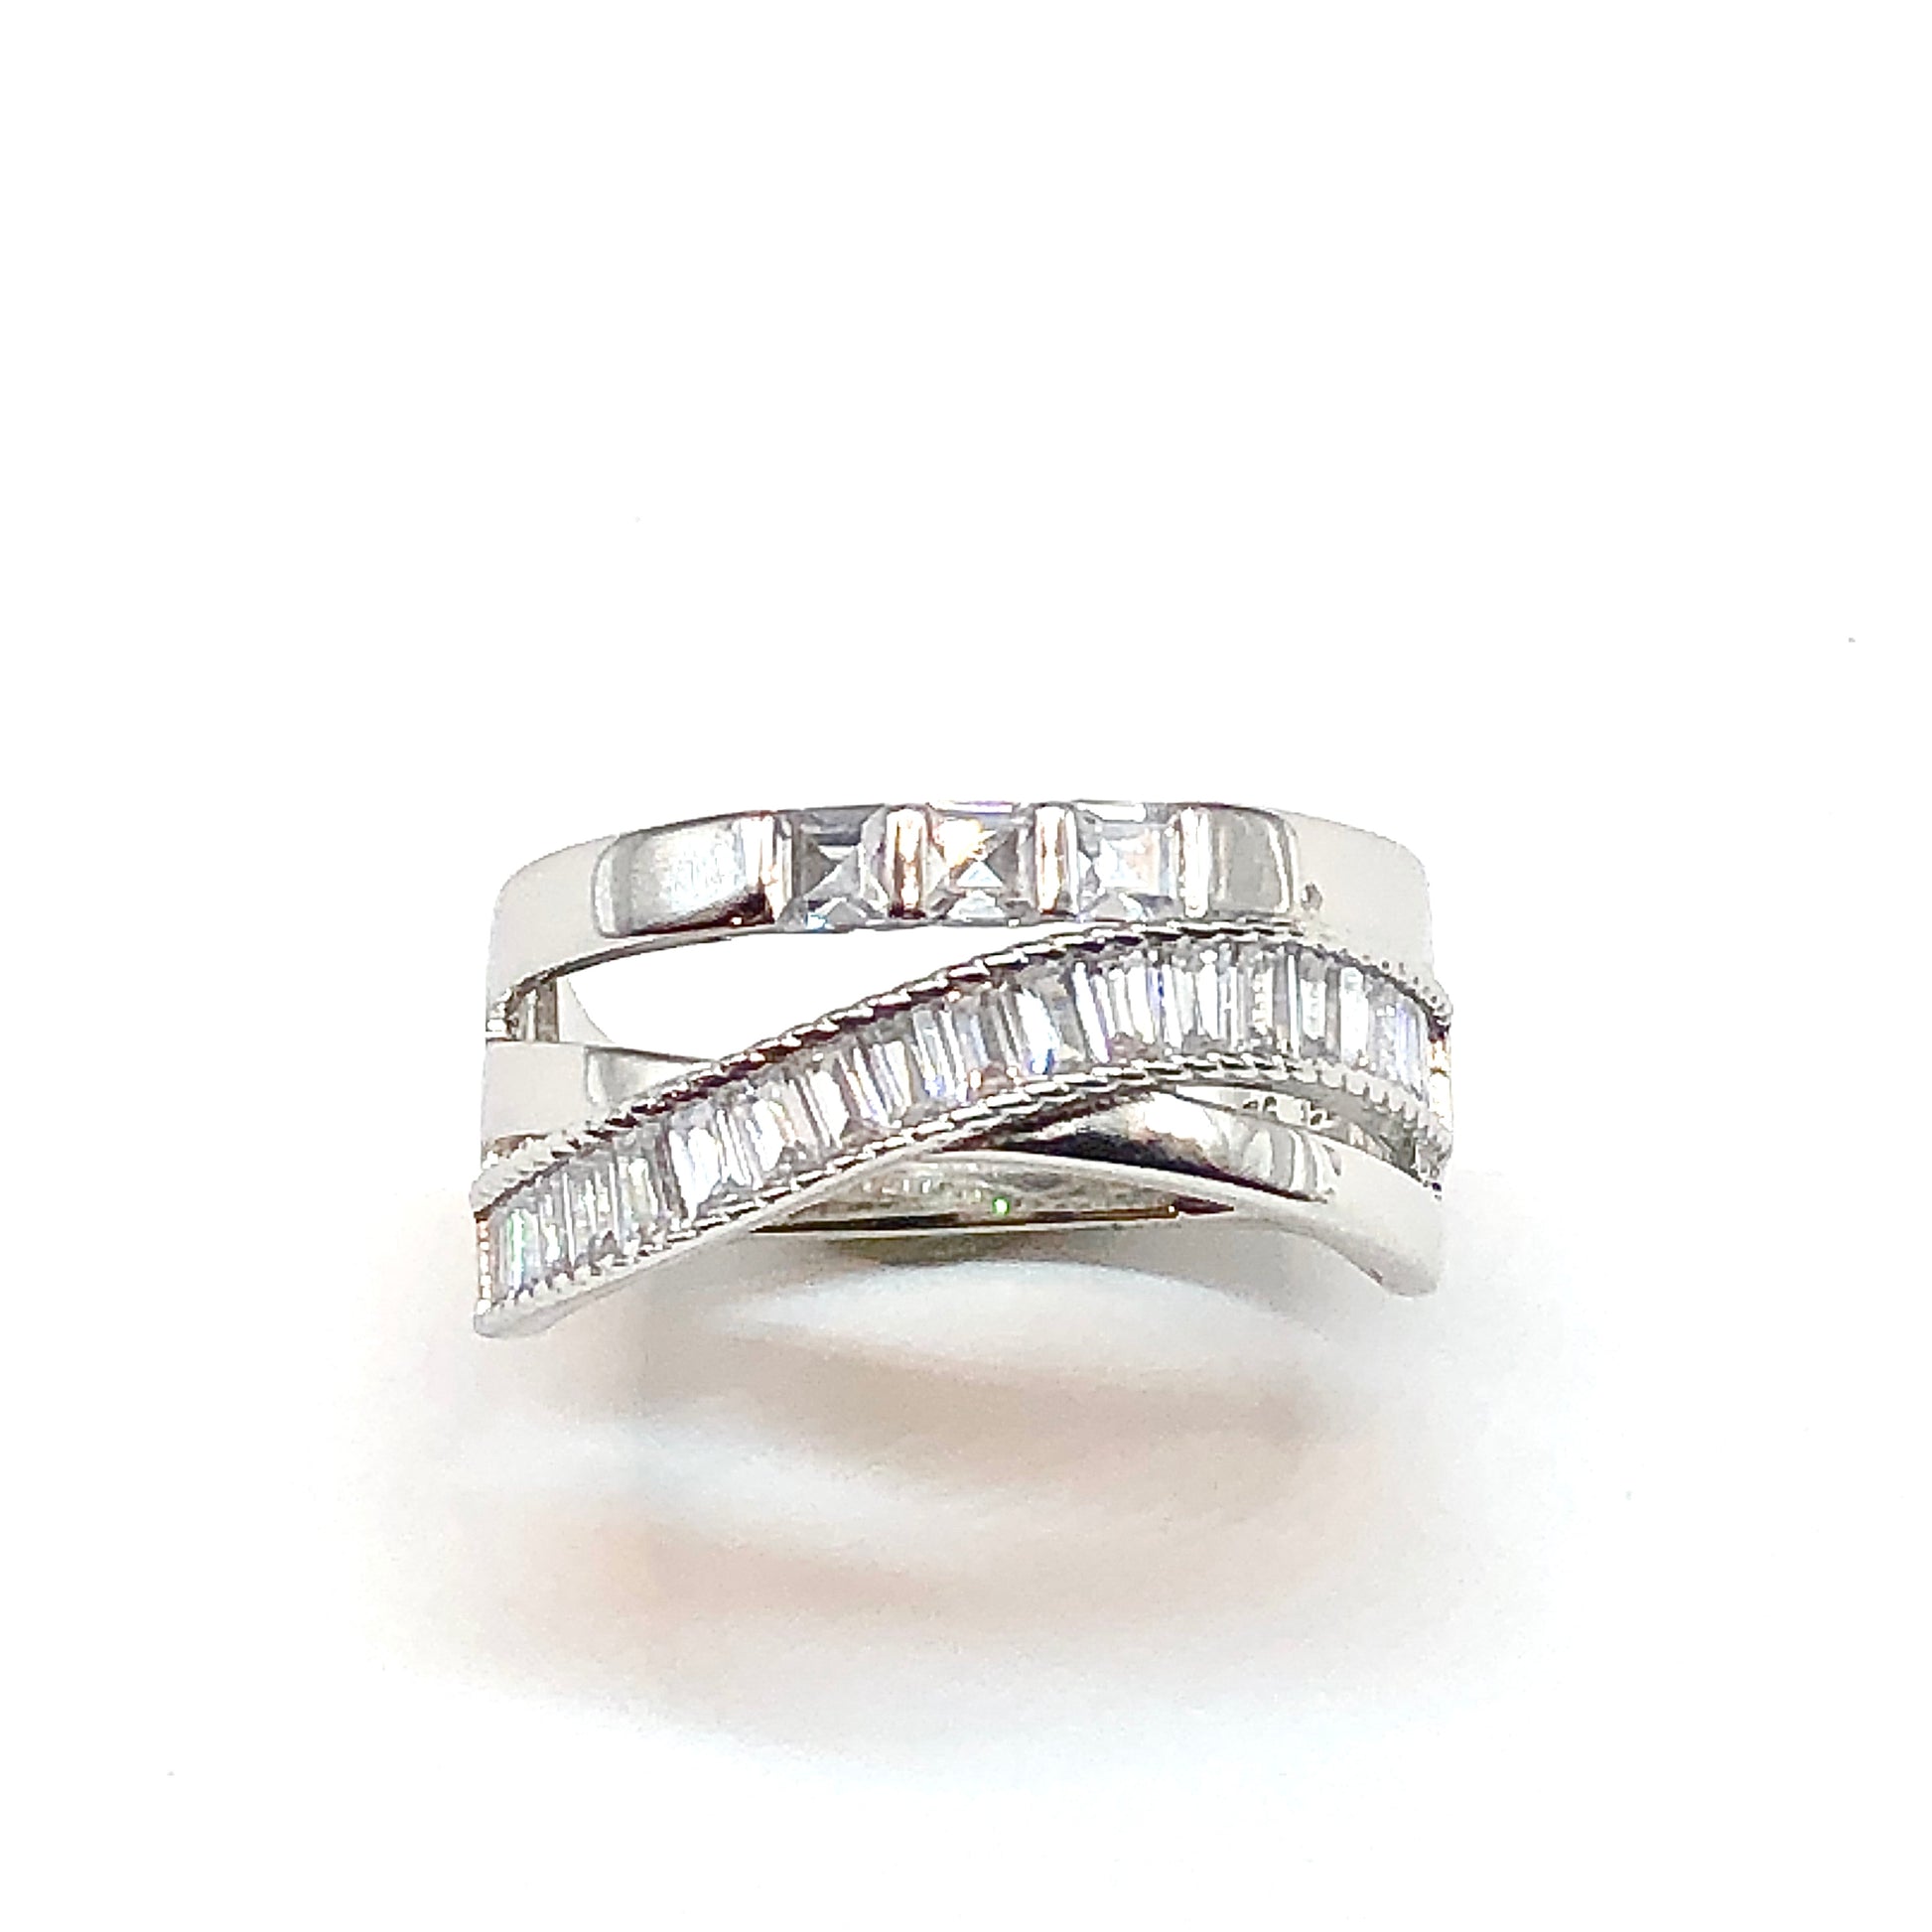 Silver Ring | Crossover Ring | Beautiful 925 Sterling Bypassing Baguette Cubic Zirconia Band